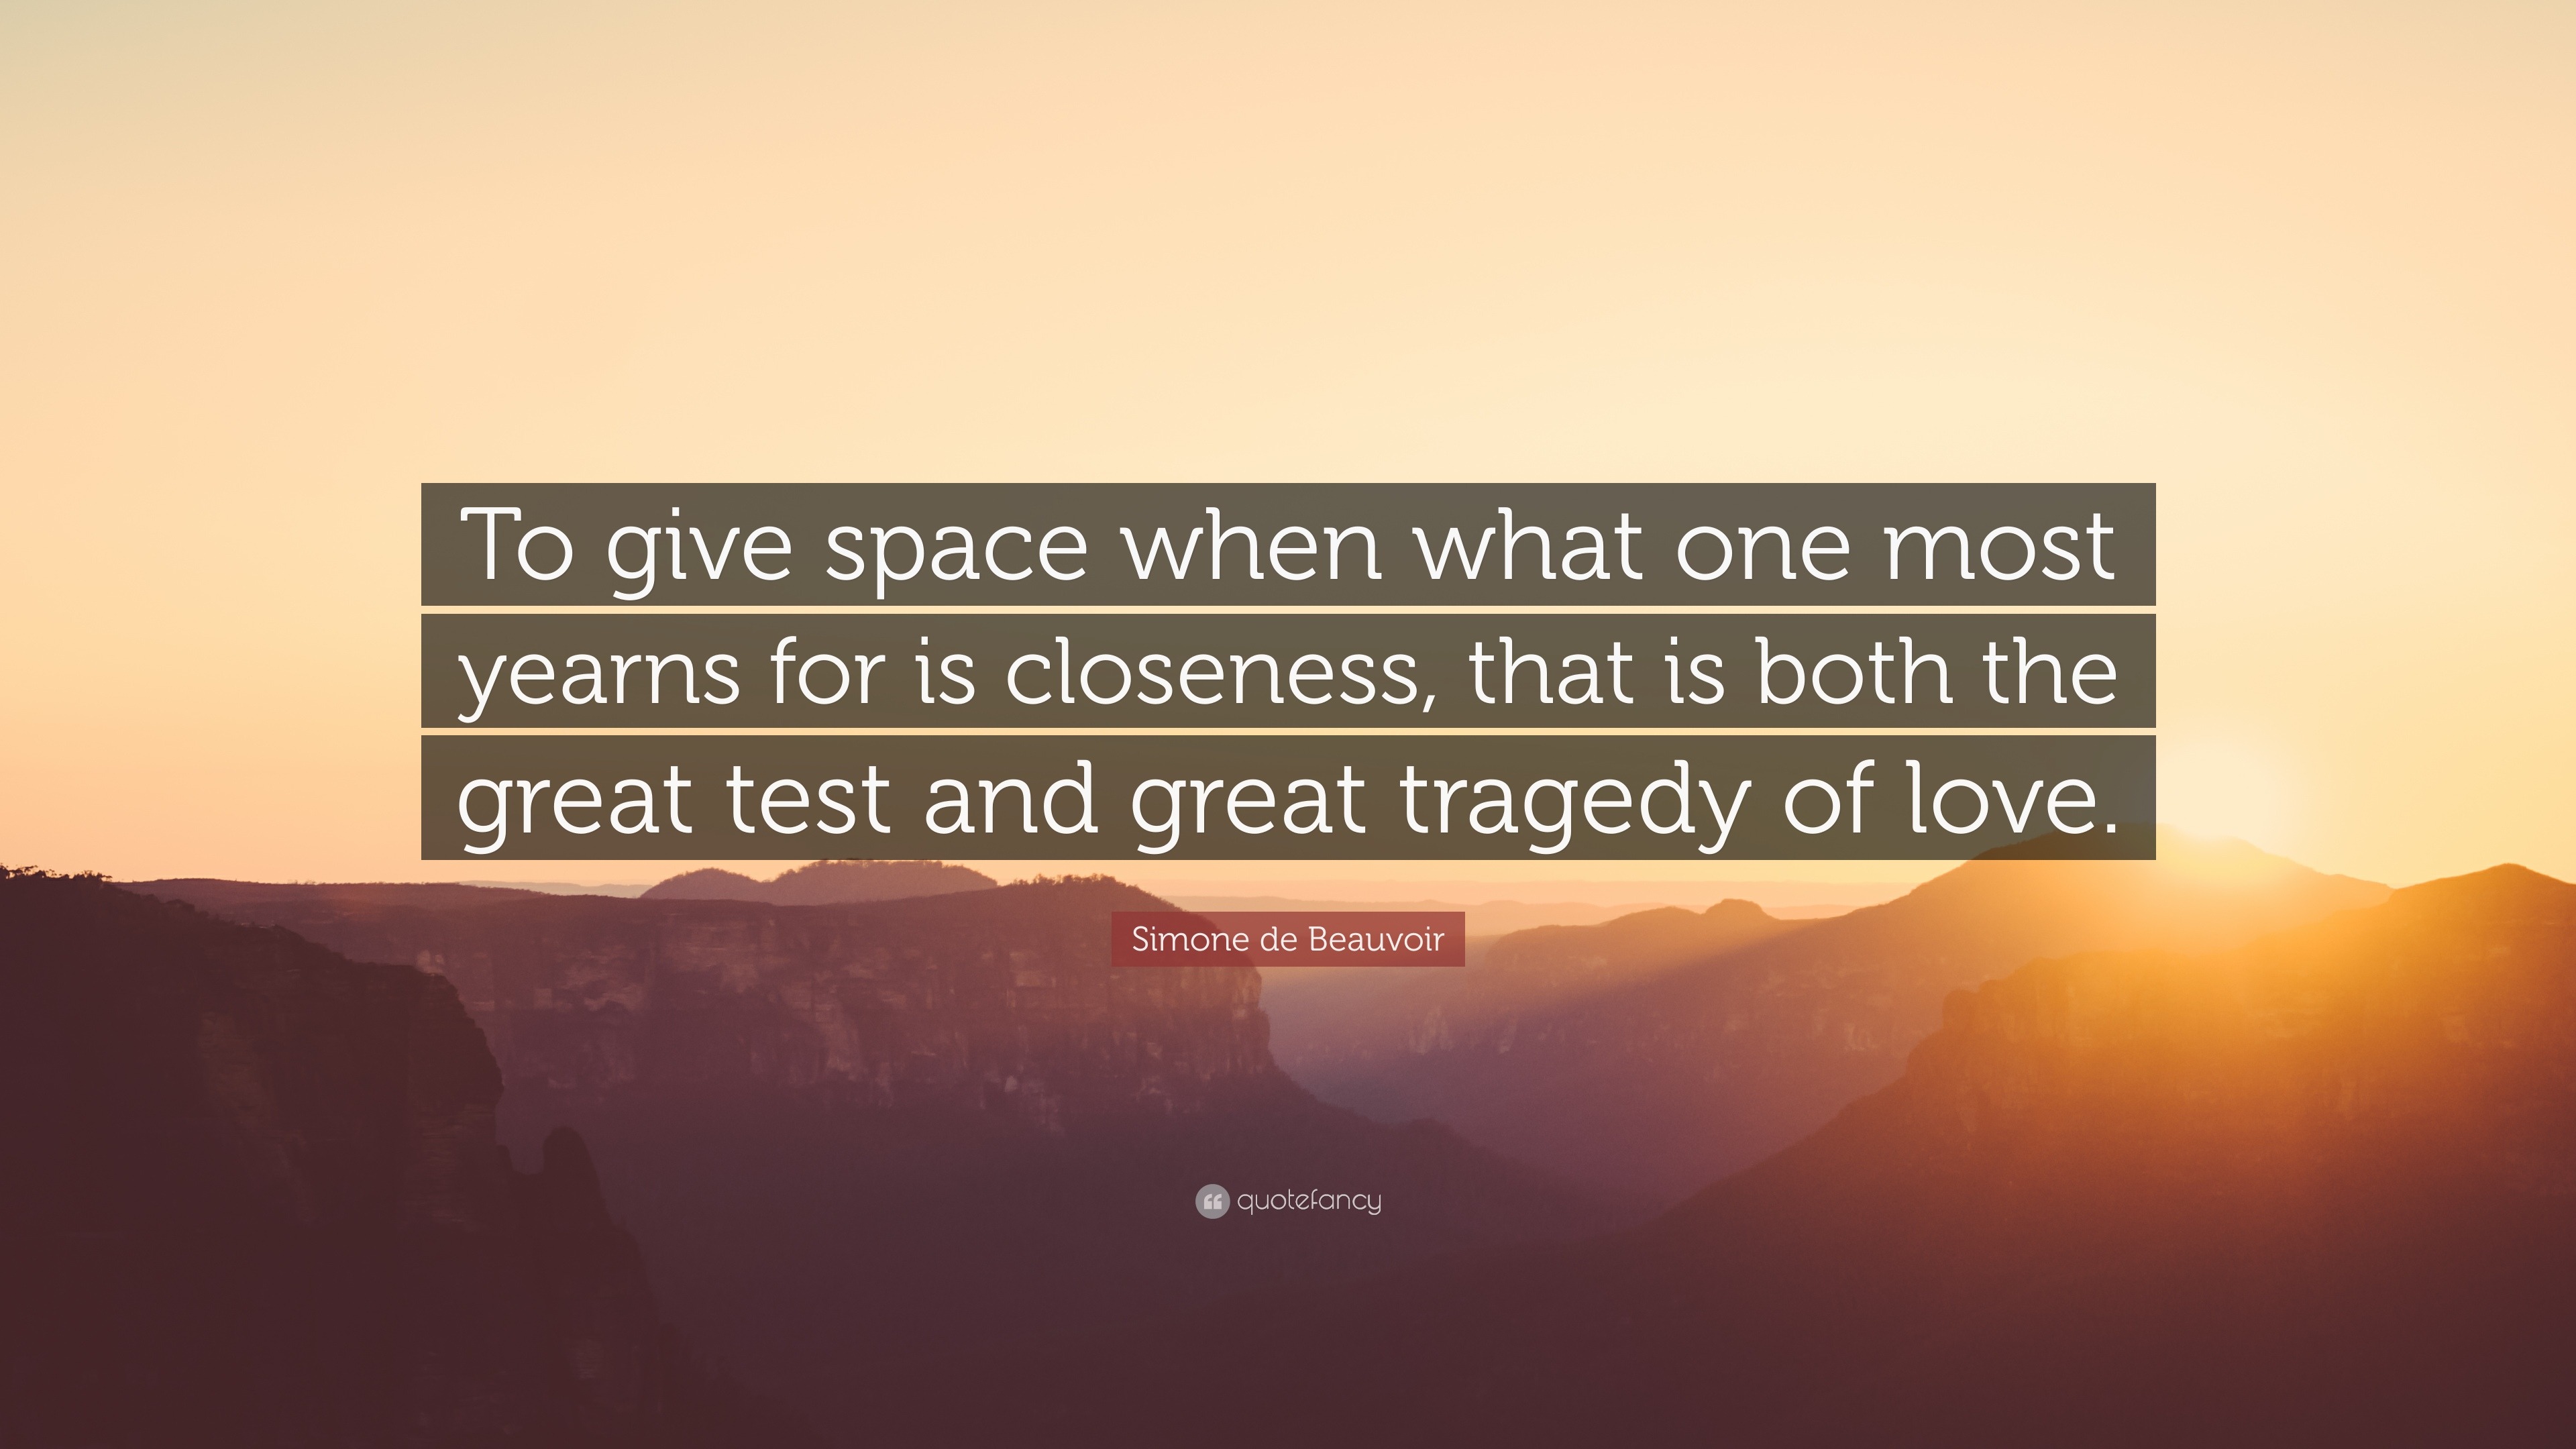 Simone de Beauvoir Quote “To give space when what one most yearns for is